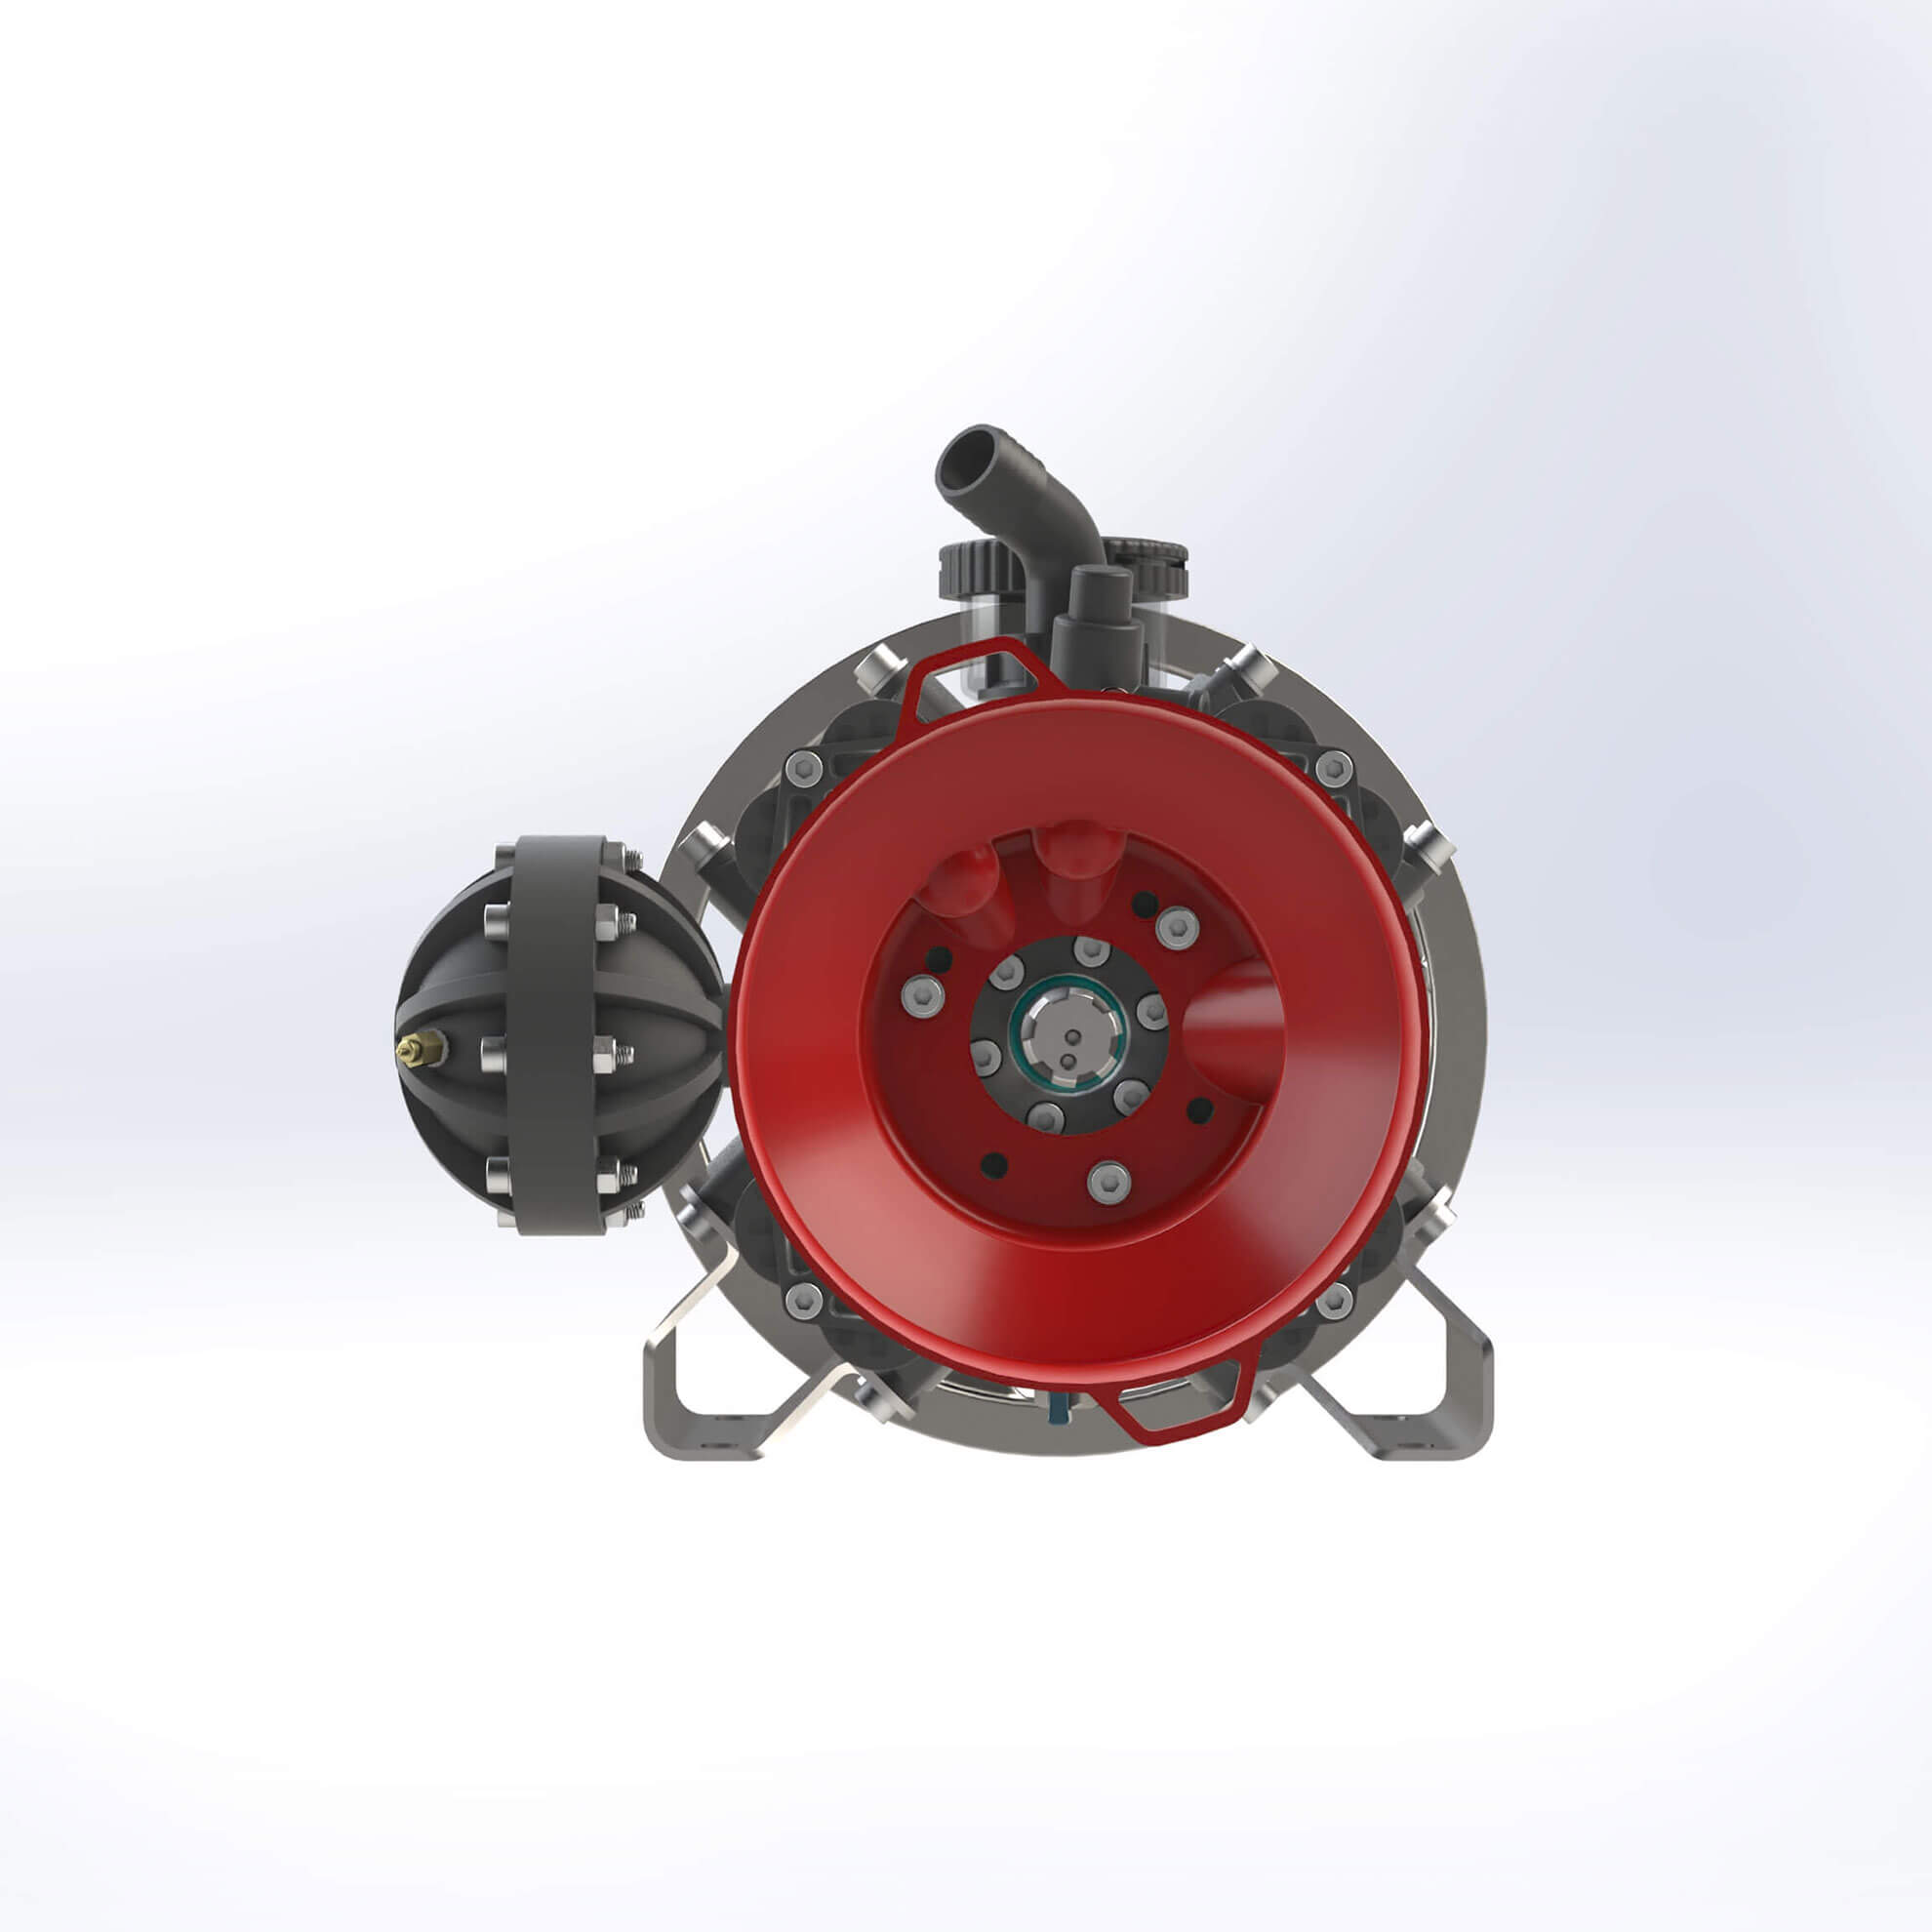 4 DIAPHRAGM PUMPS WITH PULLEY  I MTS-496 PK